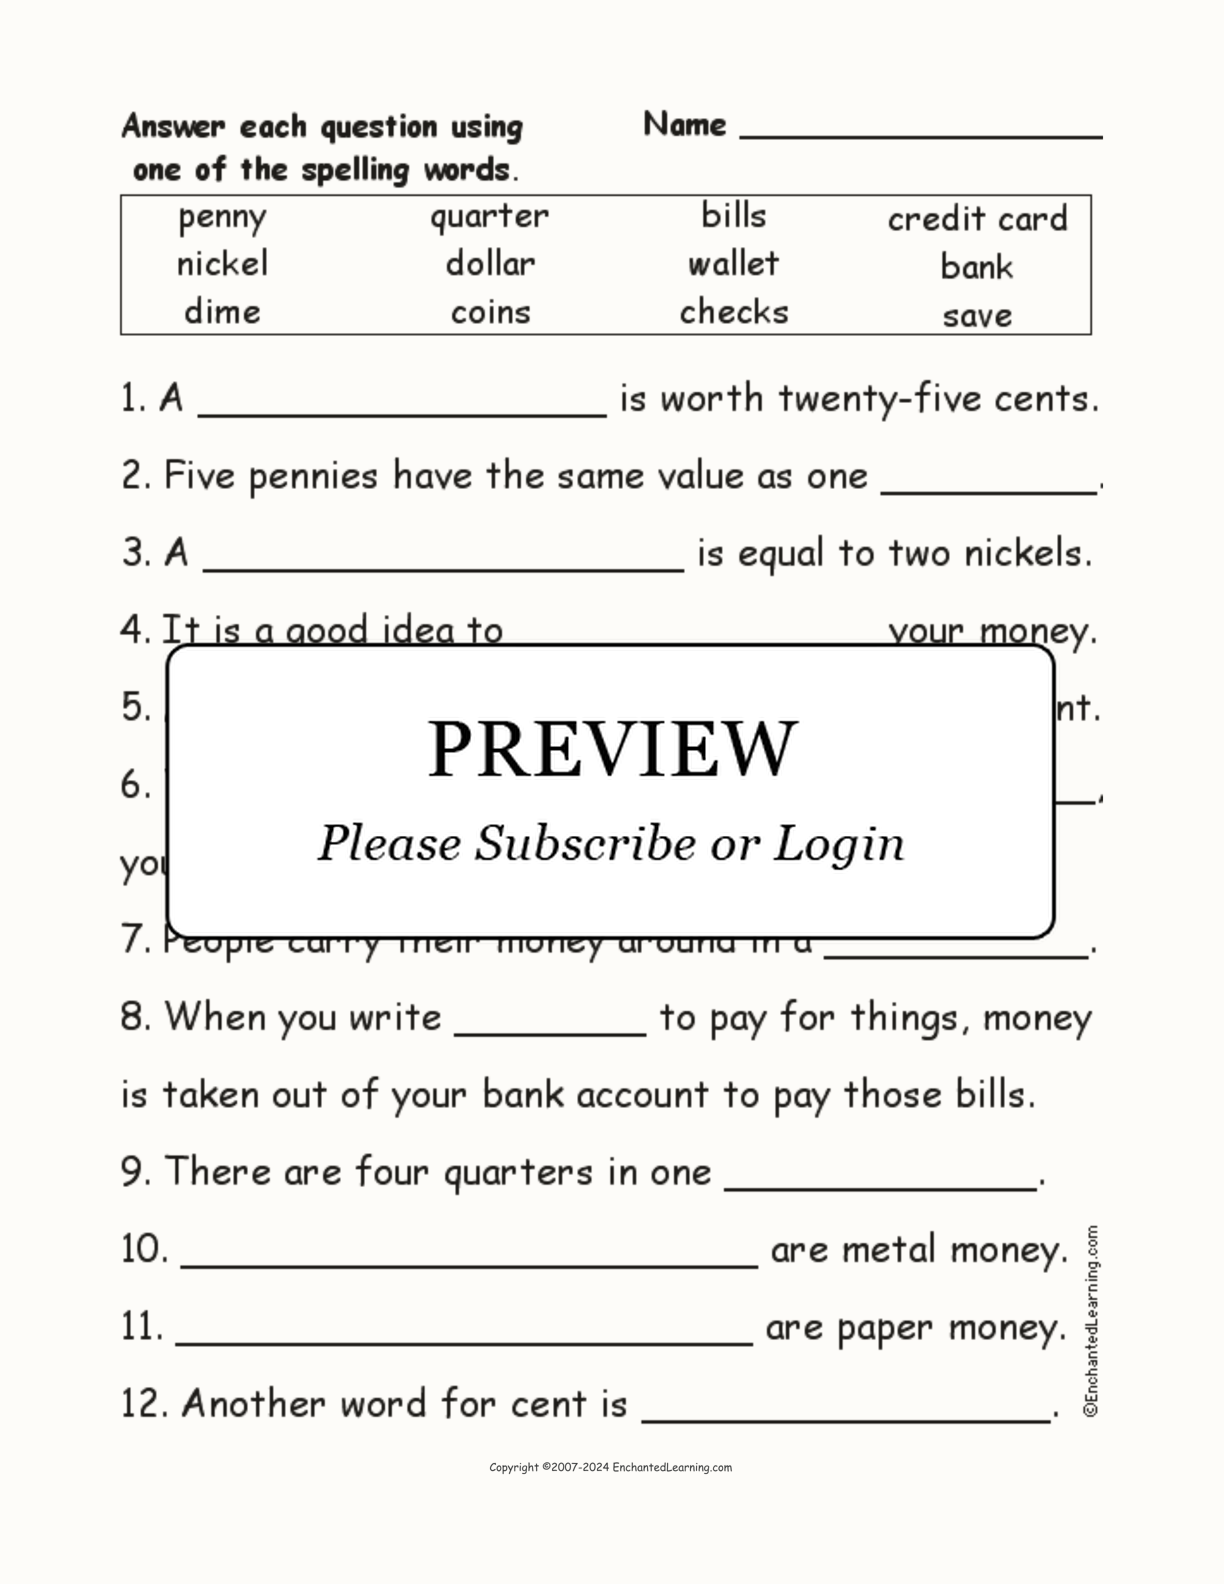 US Money: Spelling Word Questions interactive worksheet page 1